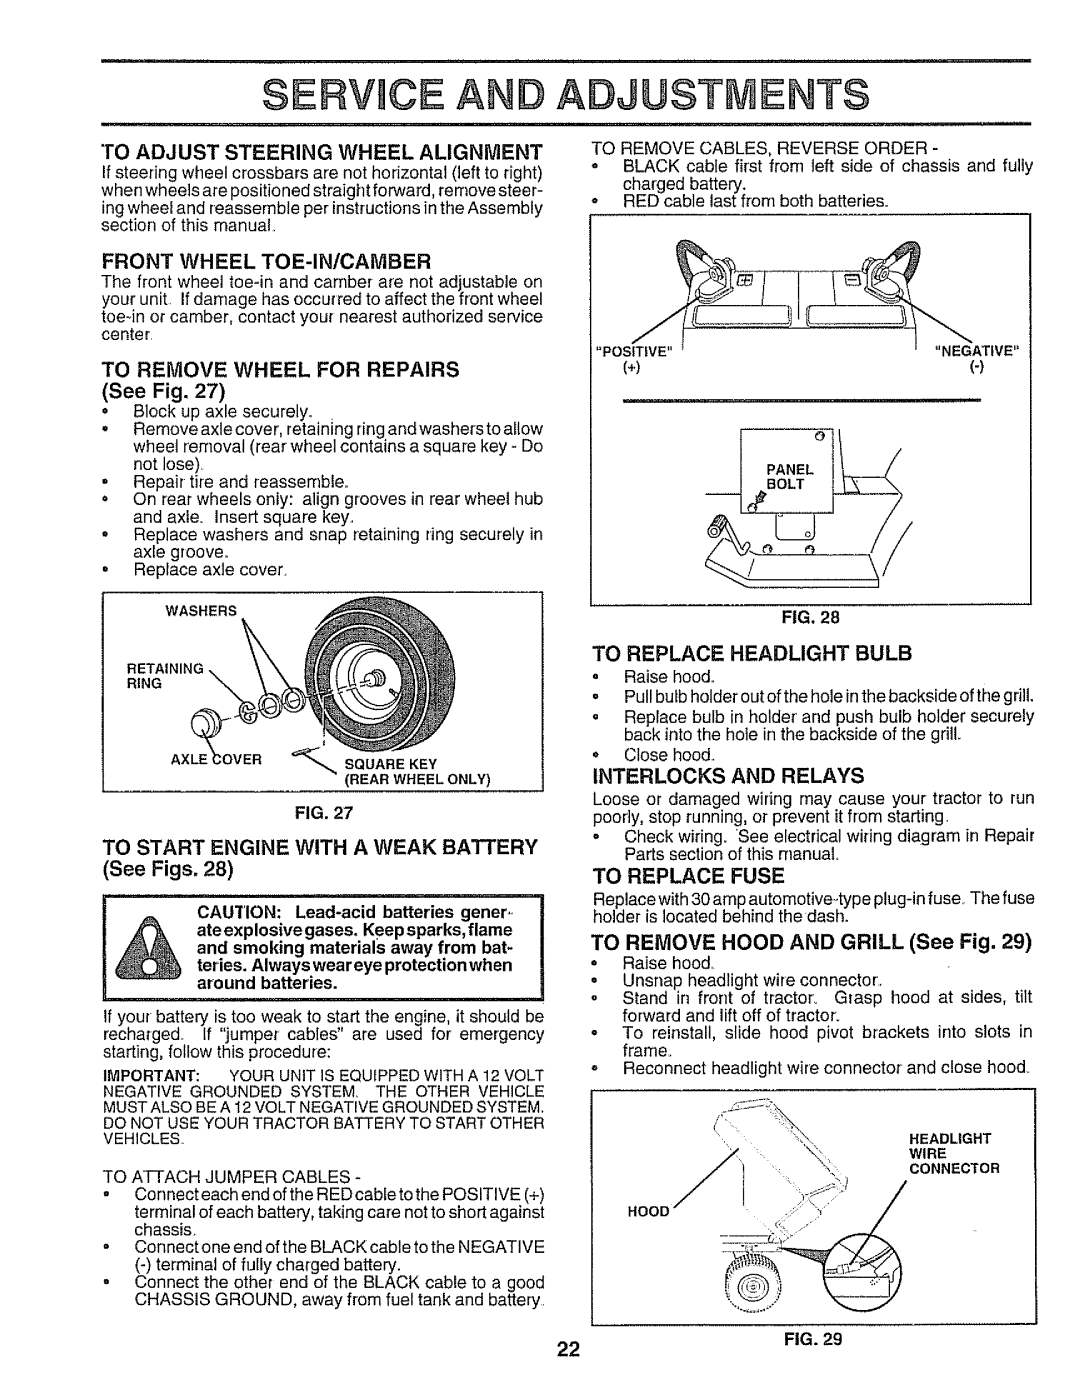 Sears 917.25545 Service And Adjustments, TO START ENGINE WITH A WEAK BAFrERY, See Figs, To Adjust Steering Wheel Alignment 